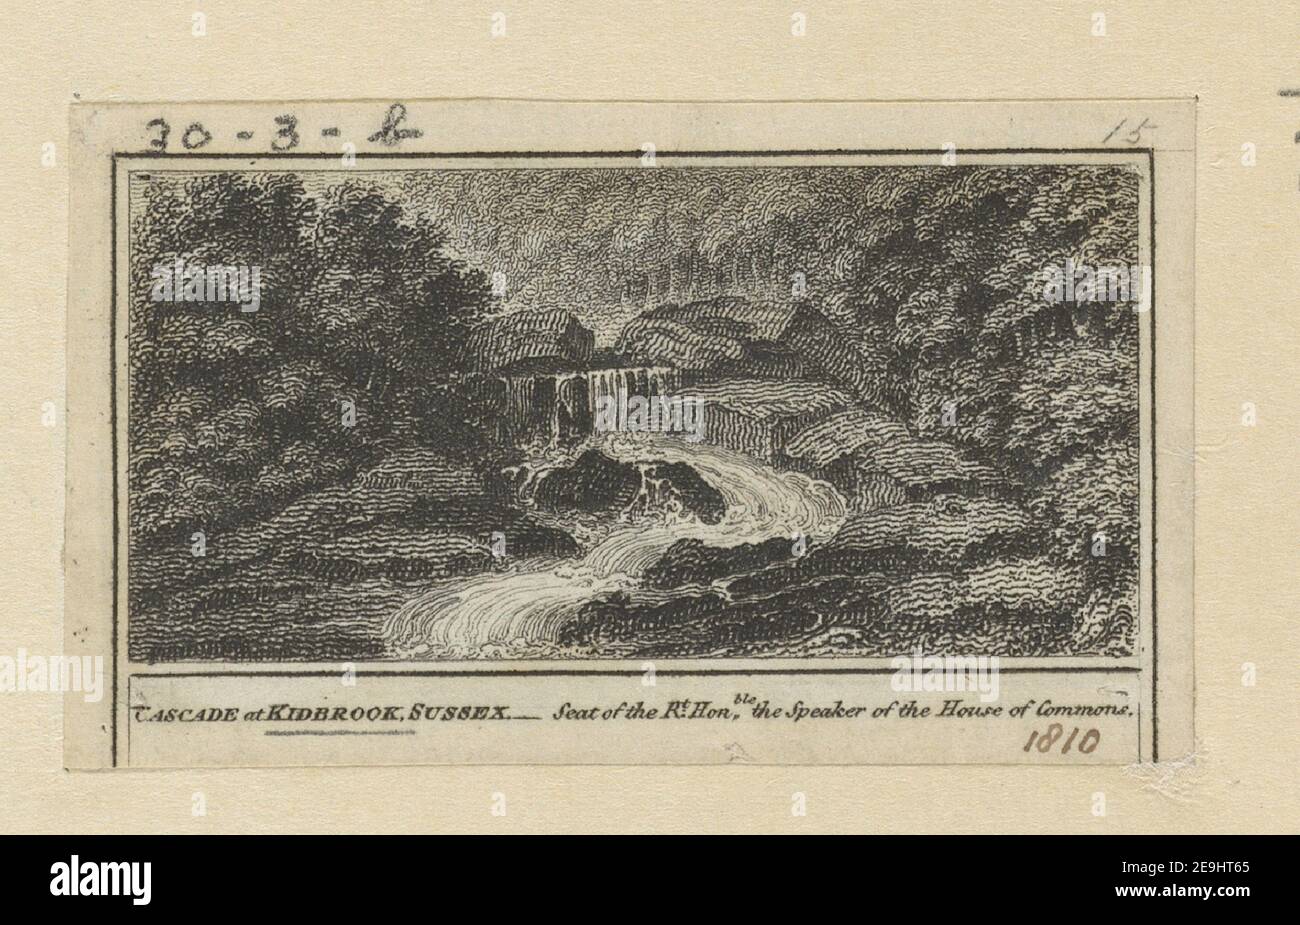 CASCADE at KIDBROOK, SUSSEX   Seat of the R.t Hon.ble the Speaker of the House of Commons. Visual Material information:  Title: CASCADE at KIDBROOK, SUSSEX - Seat of the R.t Hon.ble the Speaker of the House of Commons. 42.30.3.b. Place of publication: [London] Publisher: [W. Peacock]., Date of publication: [1810]  Item type: 1 print Medium: etching Dimensions: sheet 3.8 x 6.7 cm [trimmed within platemark].  Former owner: George III, King of Great Britain, 1738-1820 Stock Photo